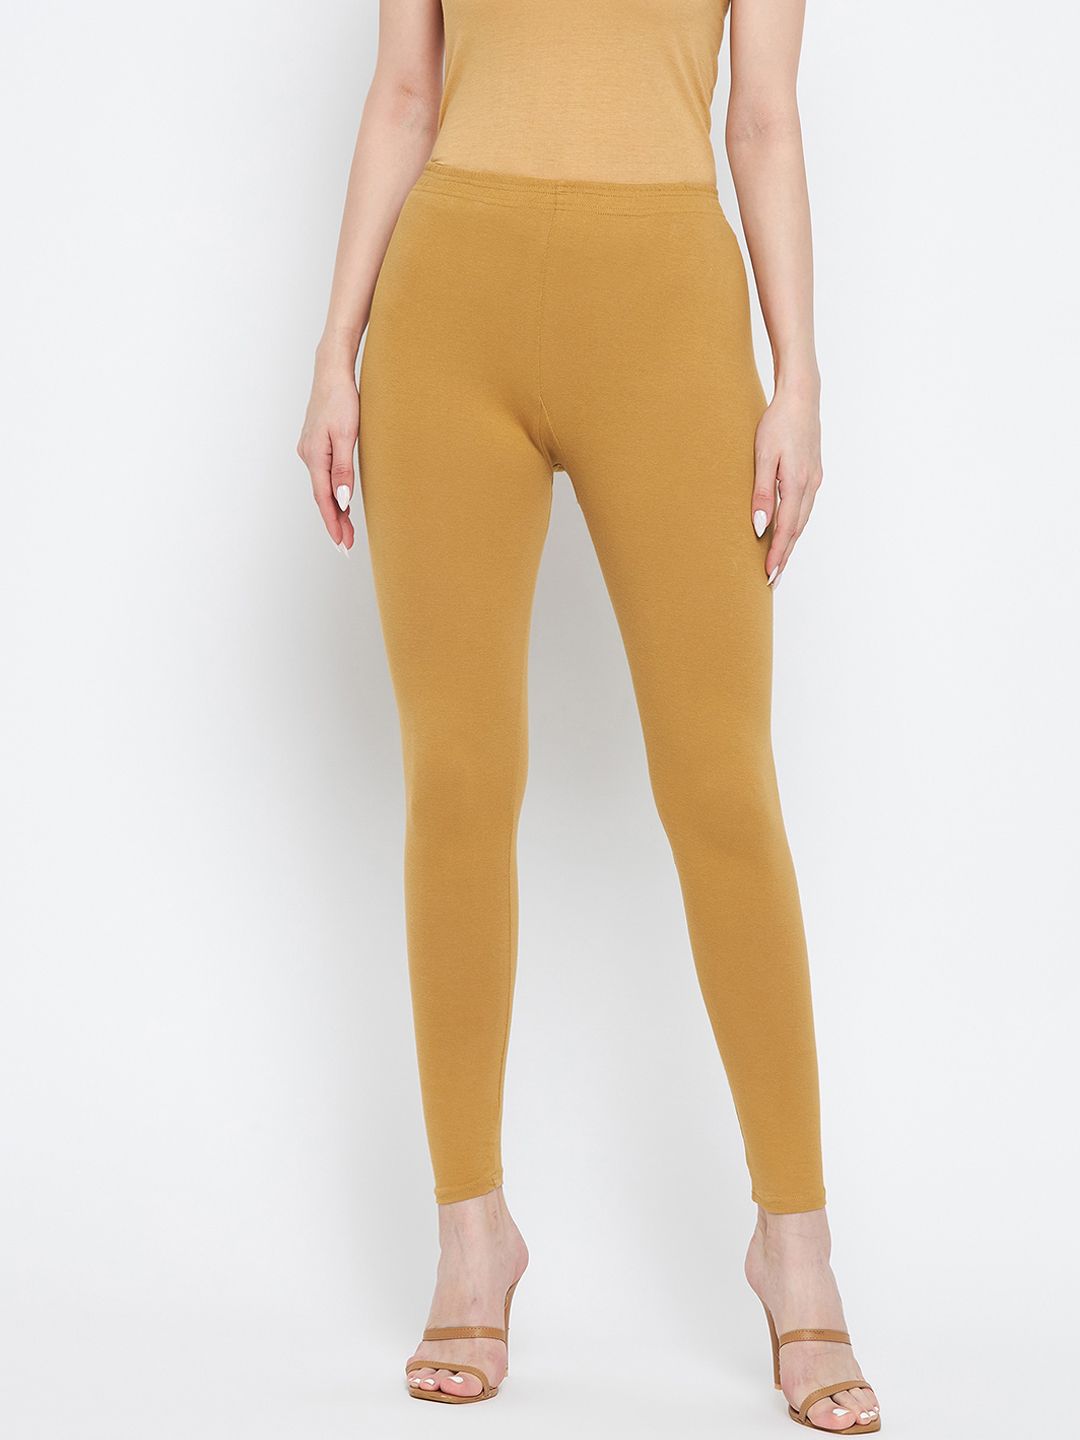 Clora Creation Women Beige Solid Ankle Length Leggings Price in India